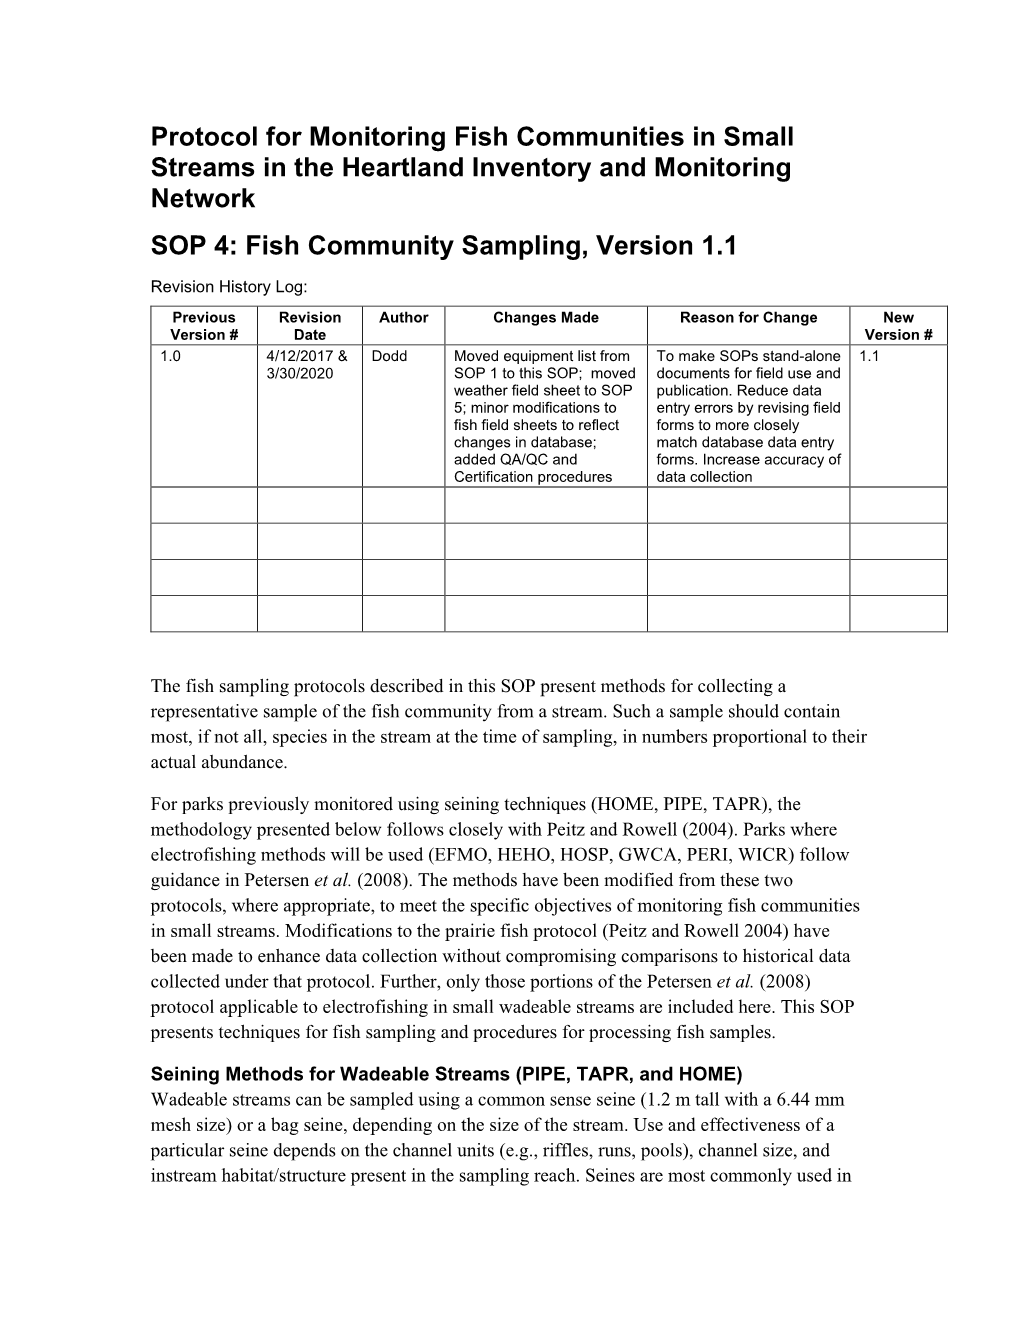 Protocol for Monitoring Fish Communities in Small Streams in the Heartland Inventory and Monitoring Network SOP 4: Fish Community Sampling, Version 1.1